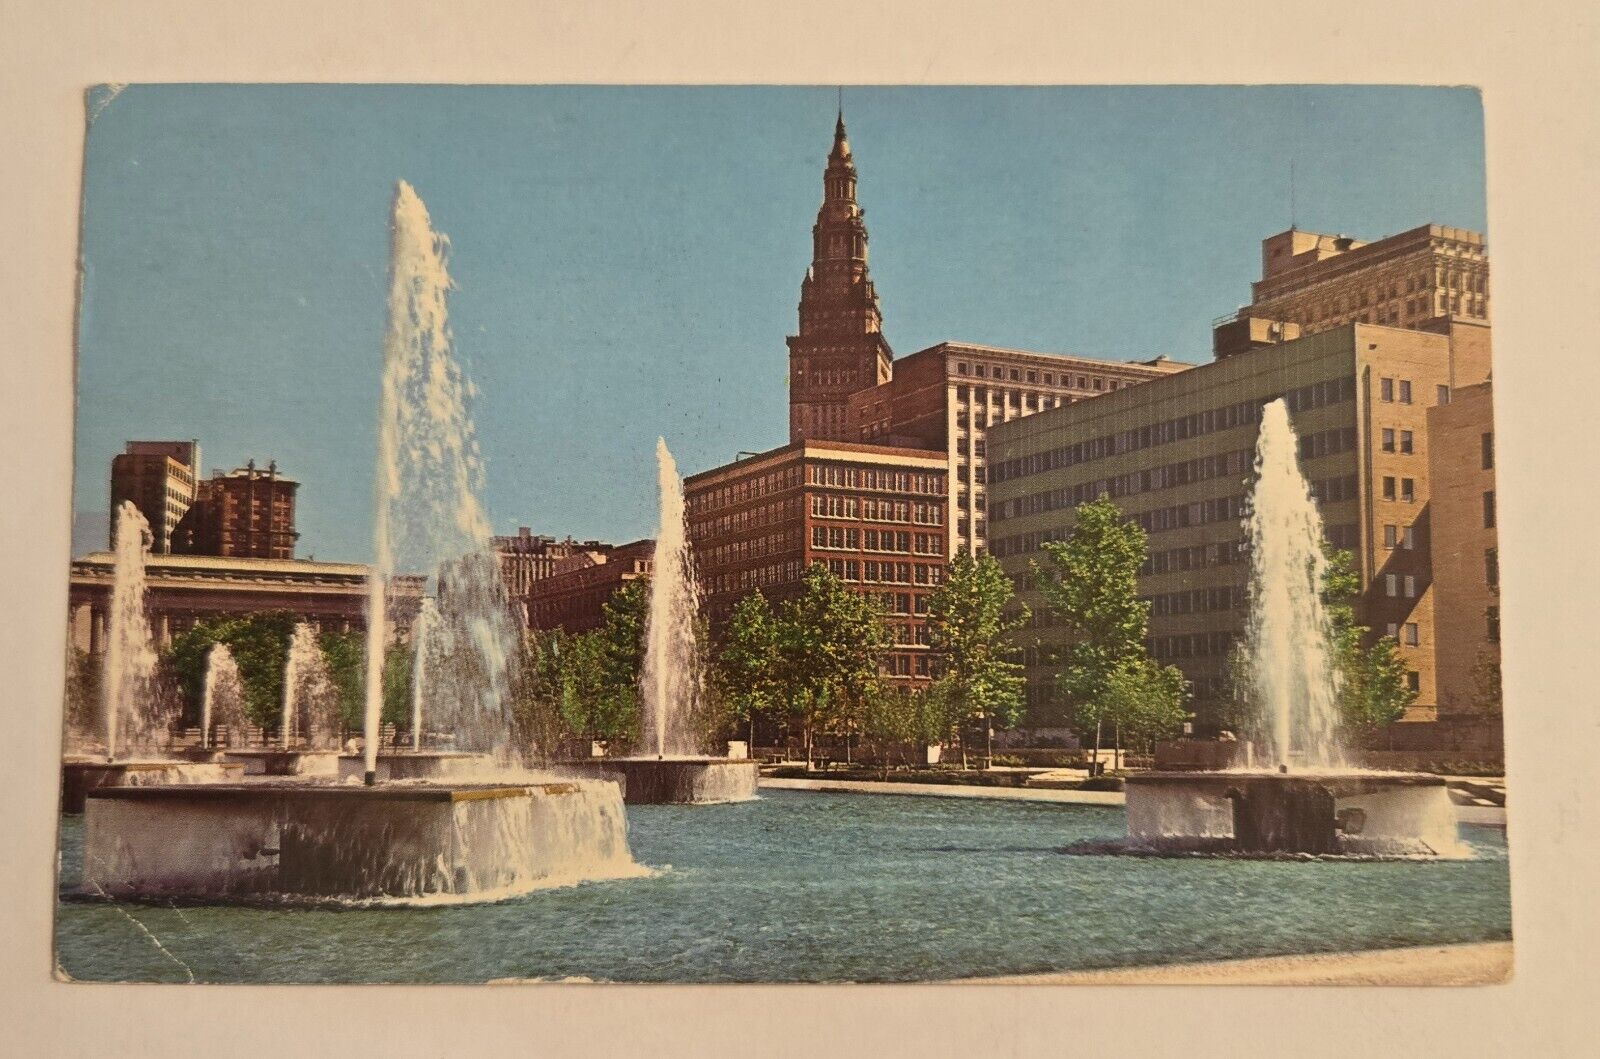 Used 1967 Postcard Cleveland Ohio OH Fountains in Cleveland Auditorium F21 